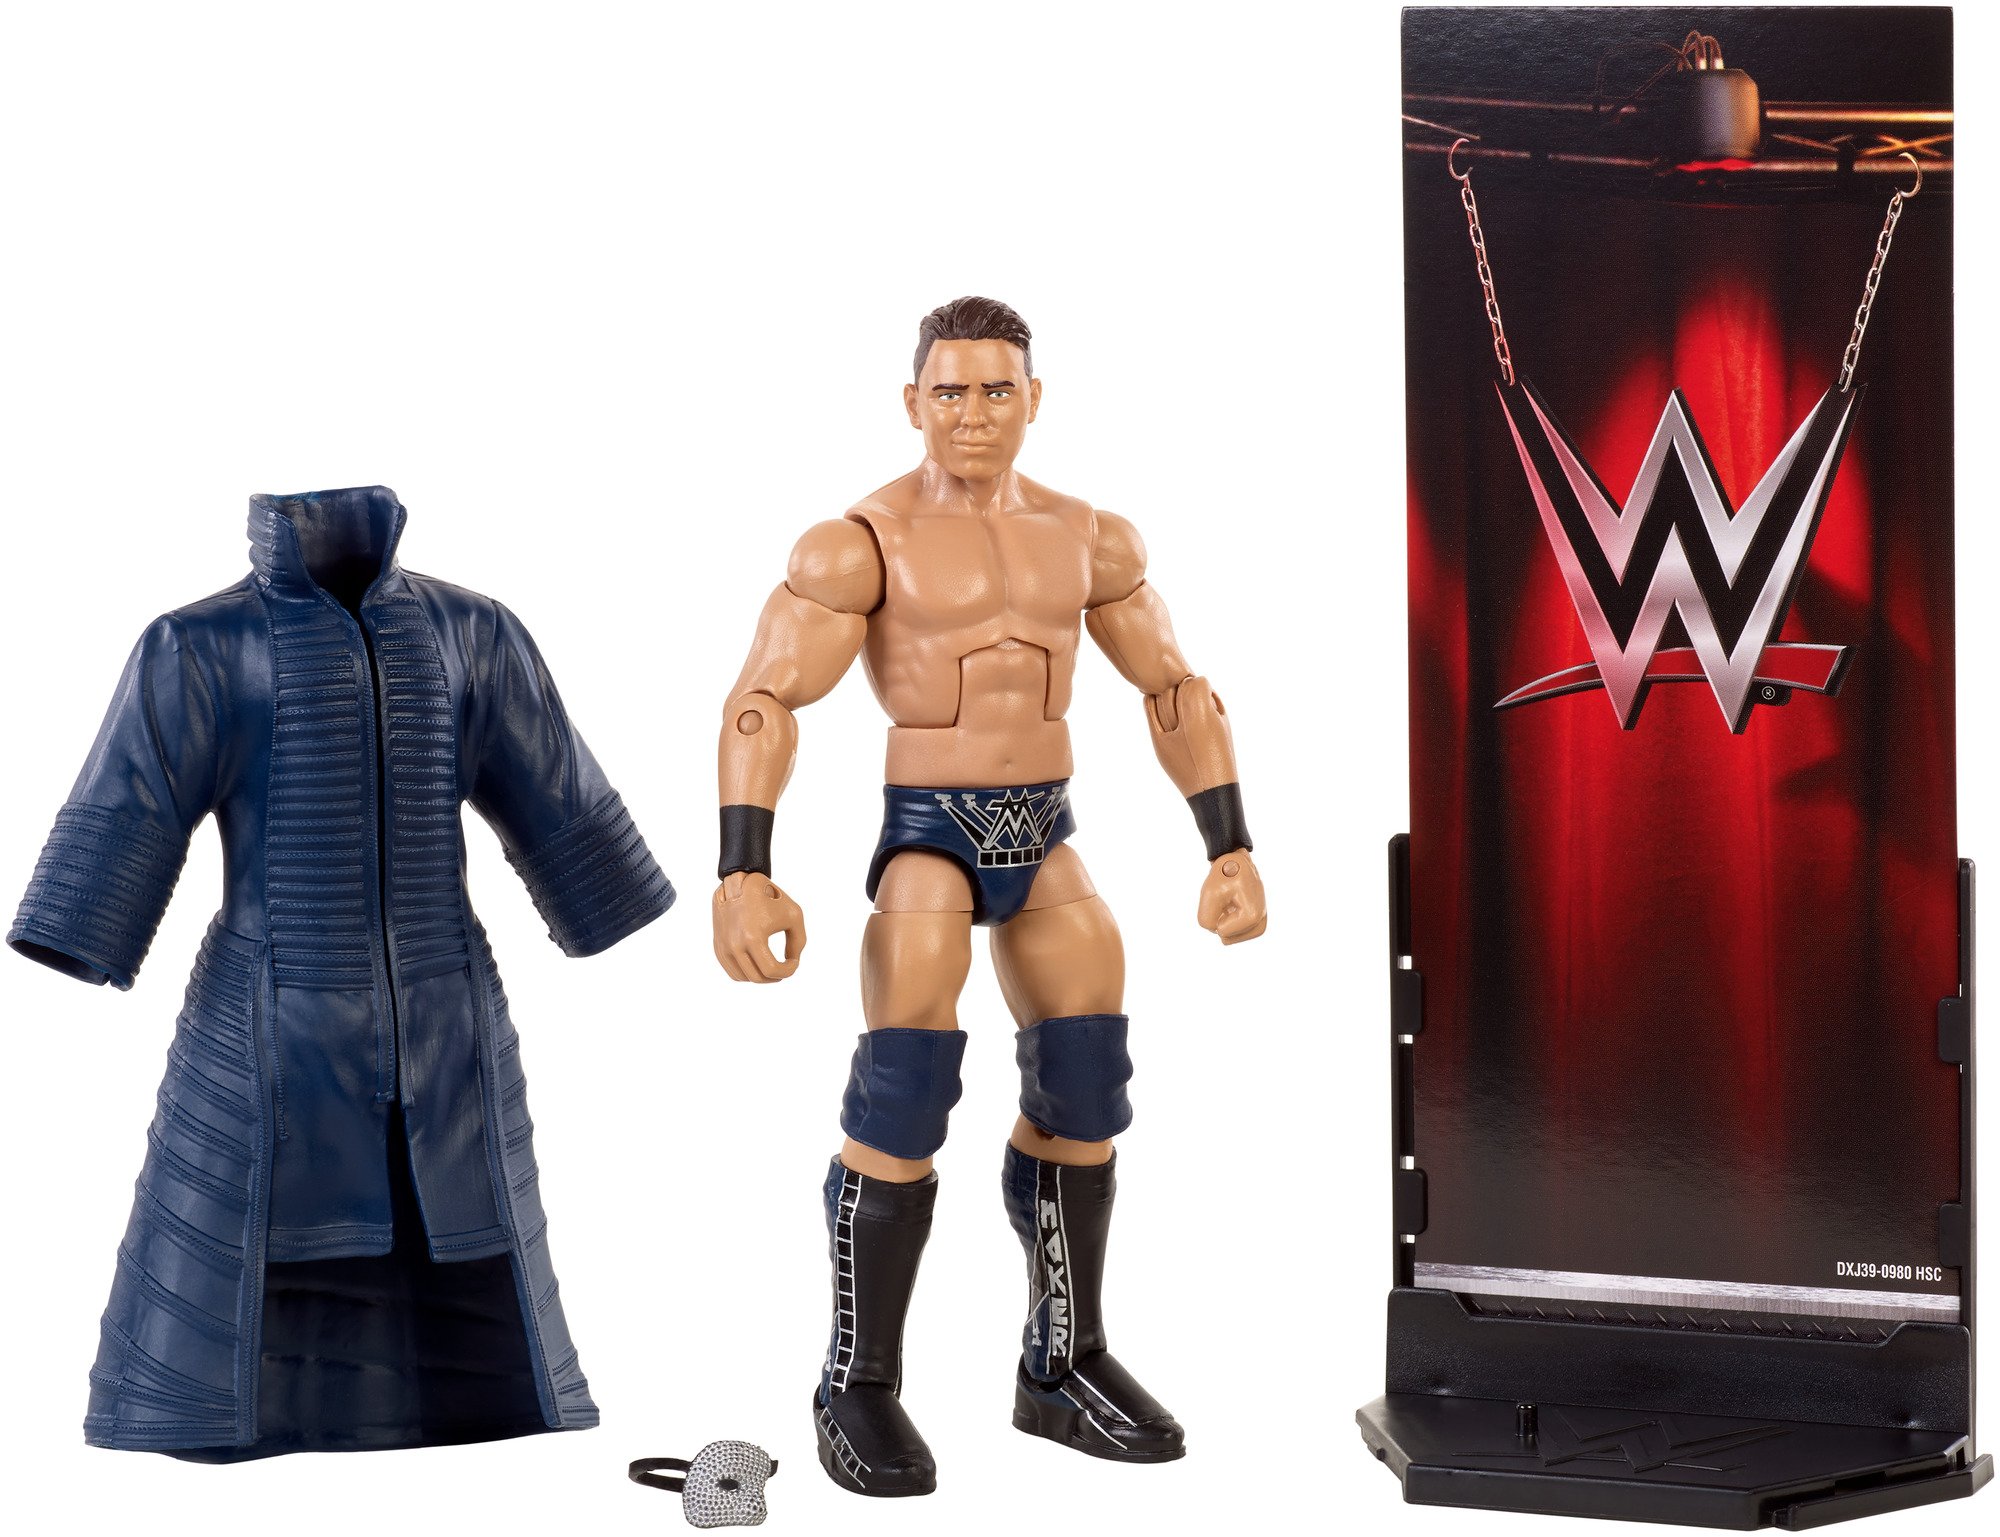 WWE Elite Collection #53 Action Figure